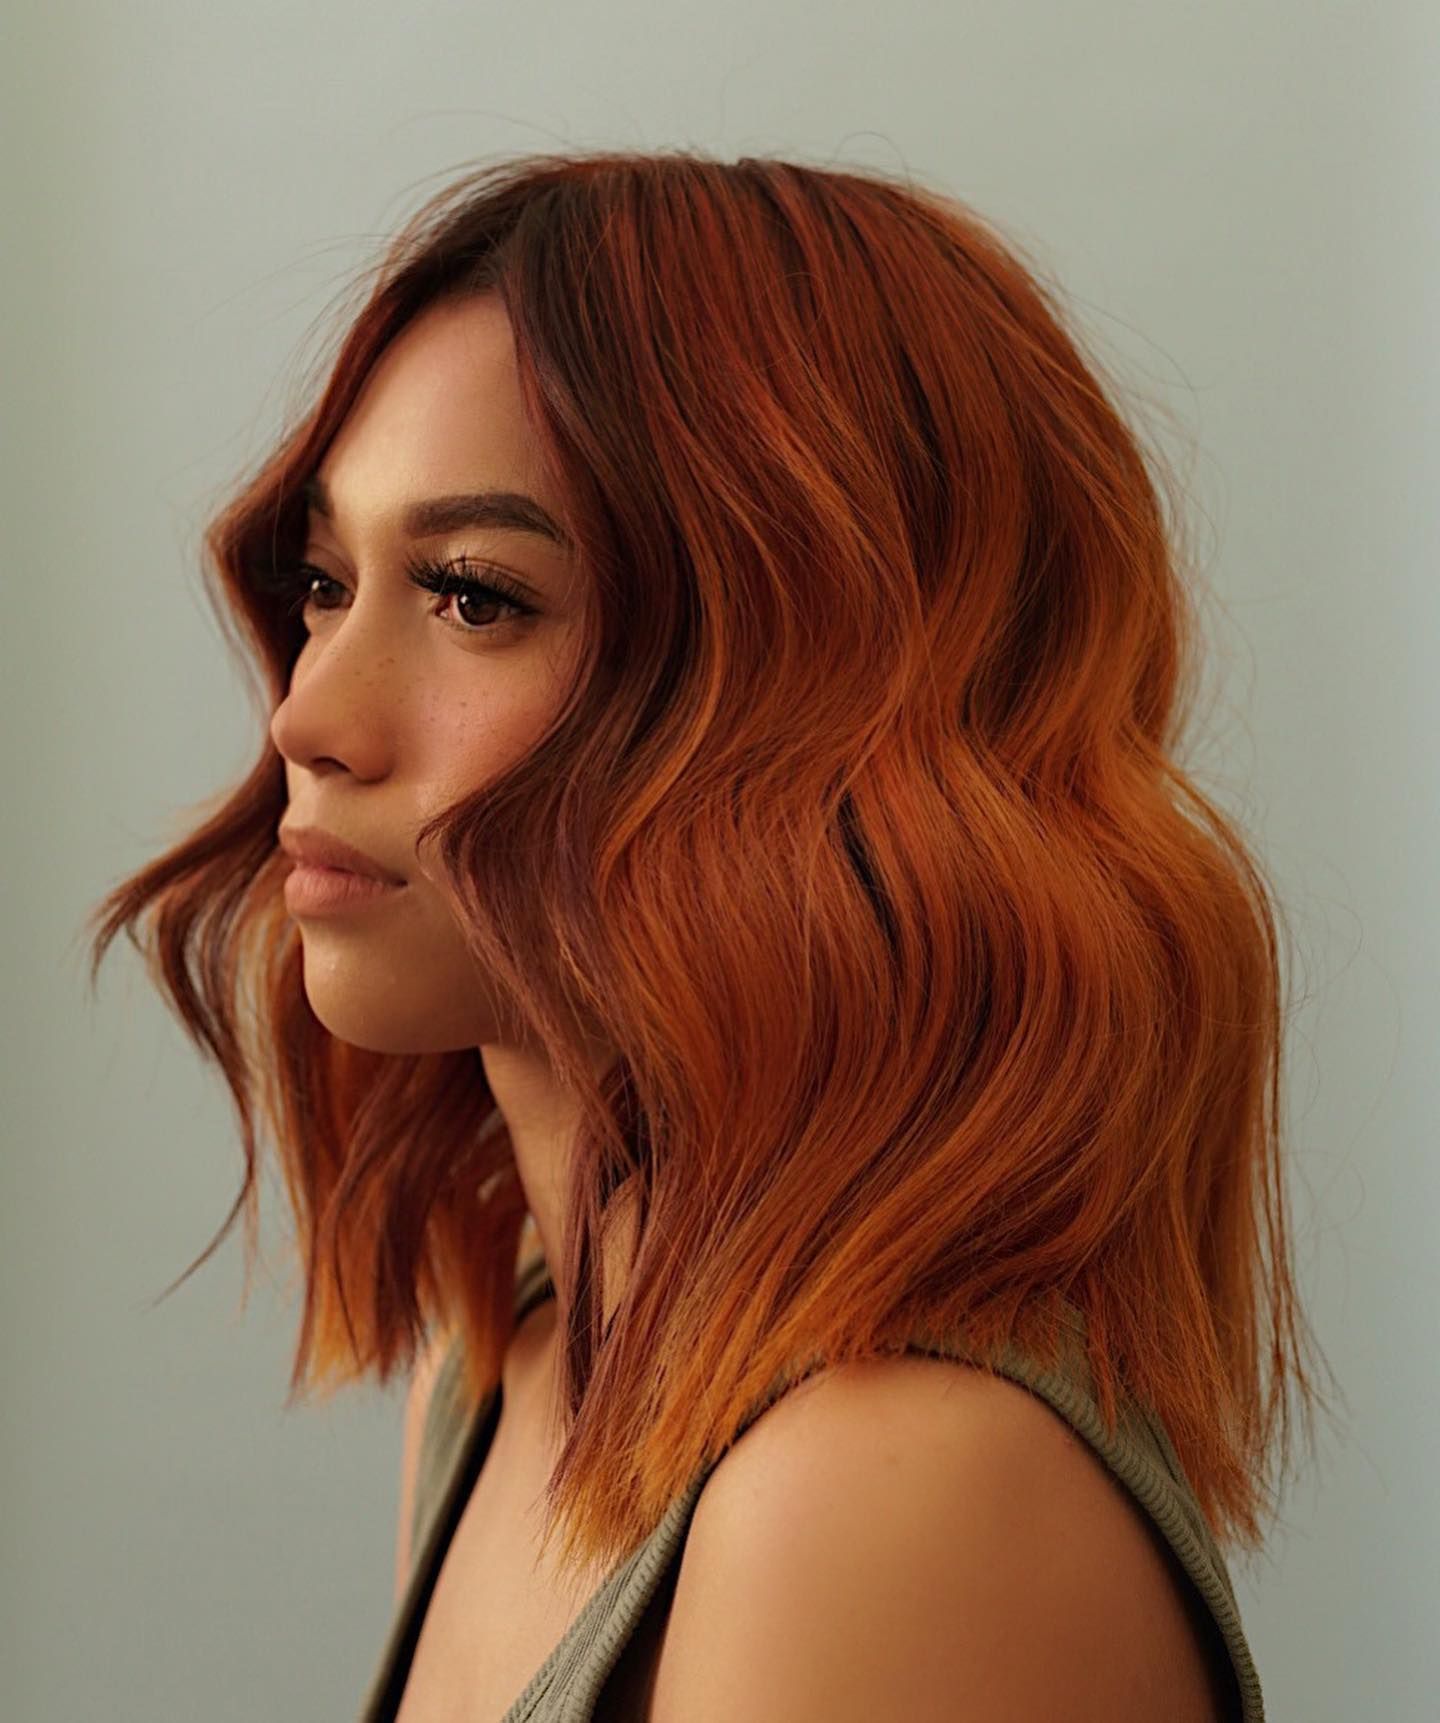 21 Outstanding Hair Color Ideas To Inspire You In 2022 – Hairstylery For Best And Newest Copper Medium Length Hairstyles (View 25 of 25)